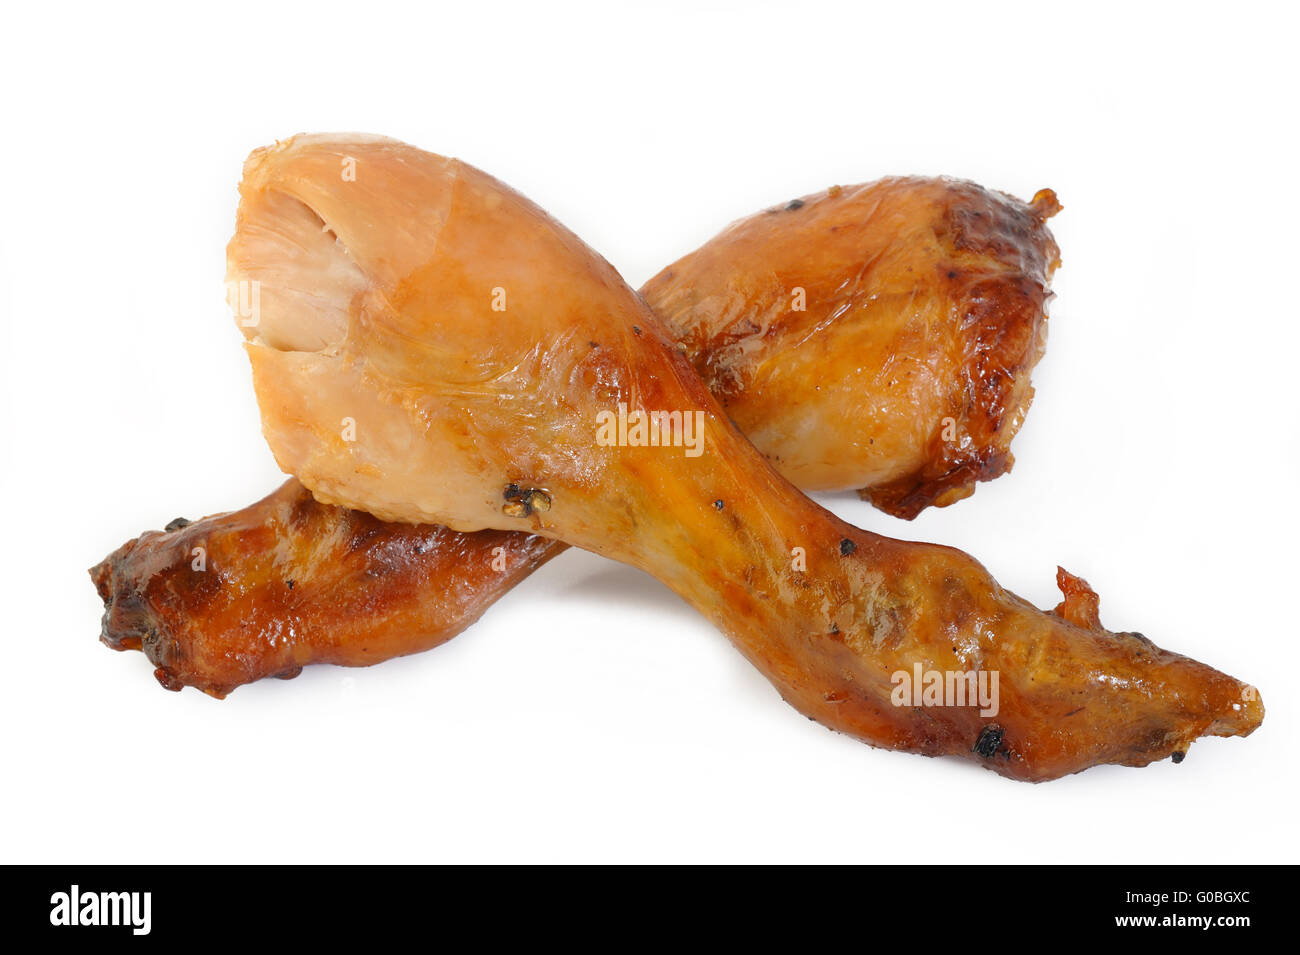 Baked chicken drumstick on white background Stock Photo